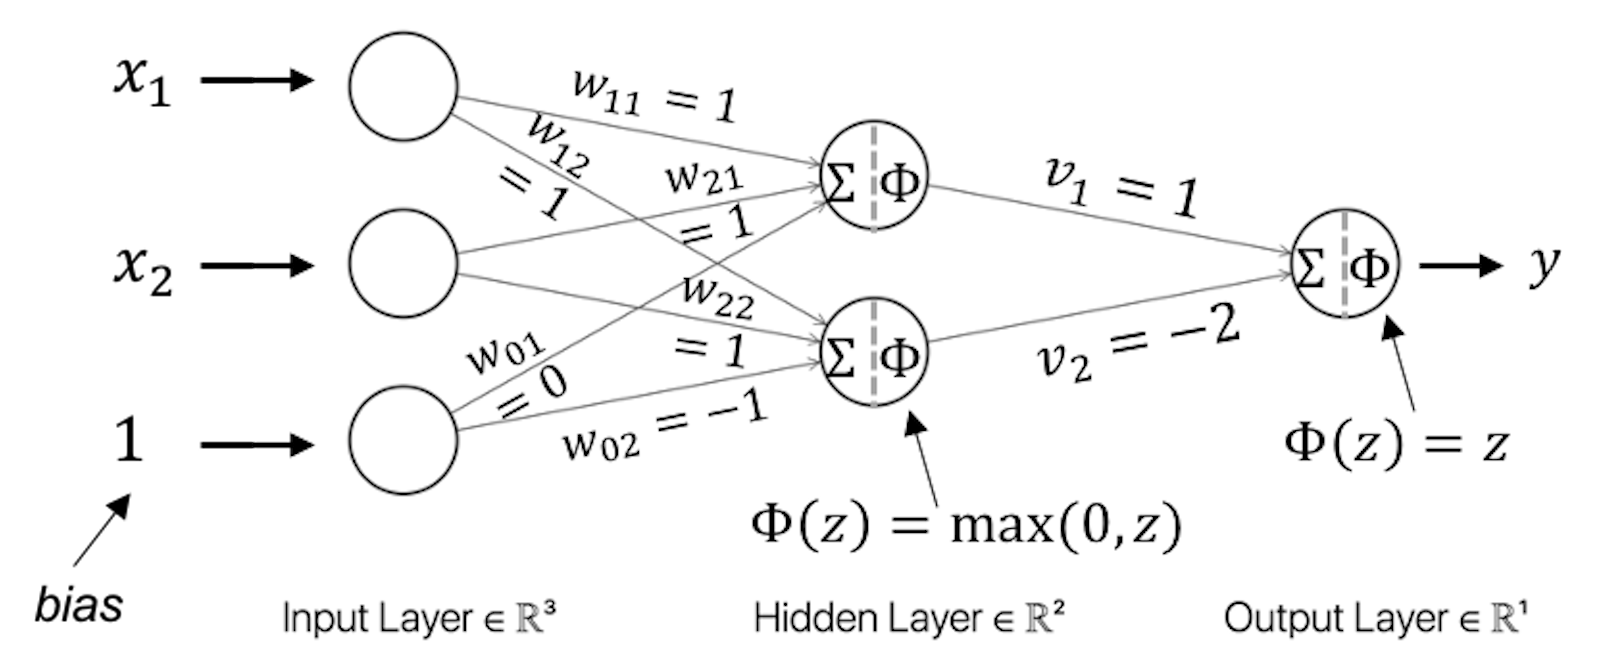 Architecture of a neural network with a hidden layer